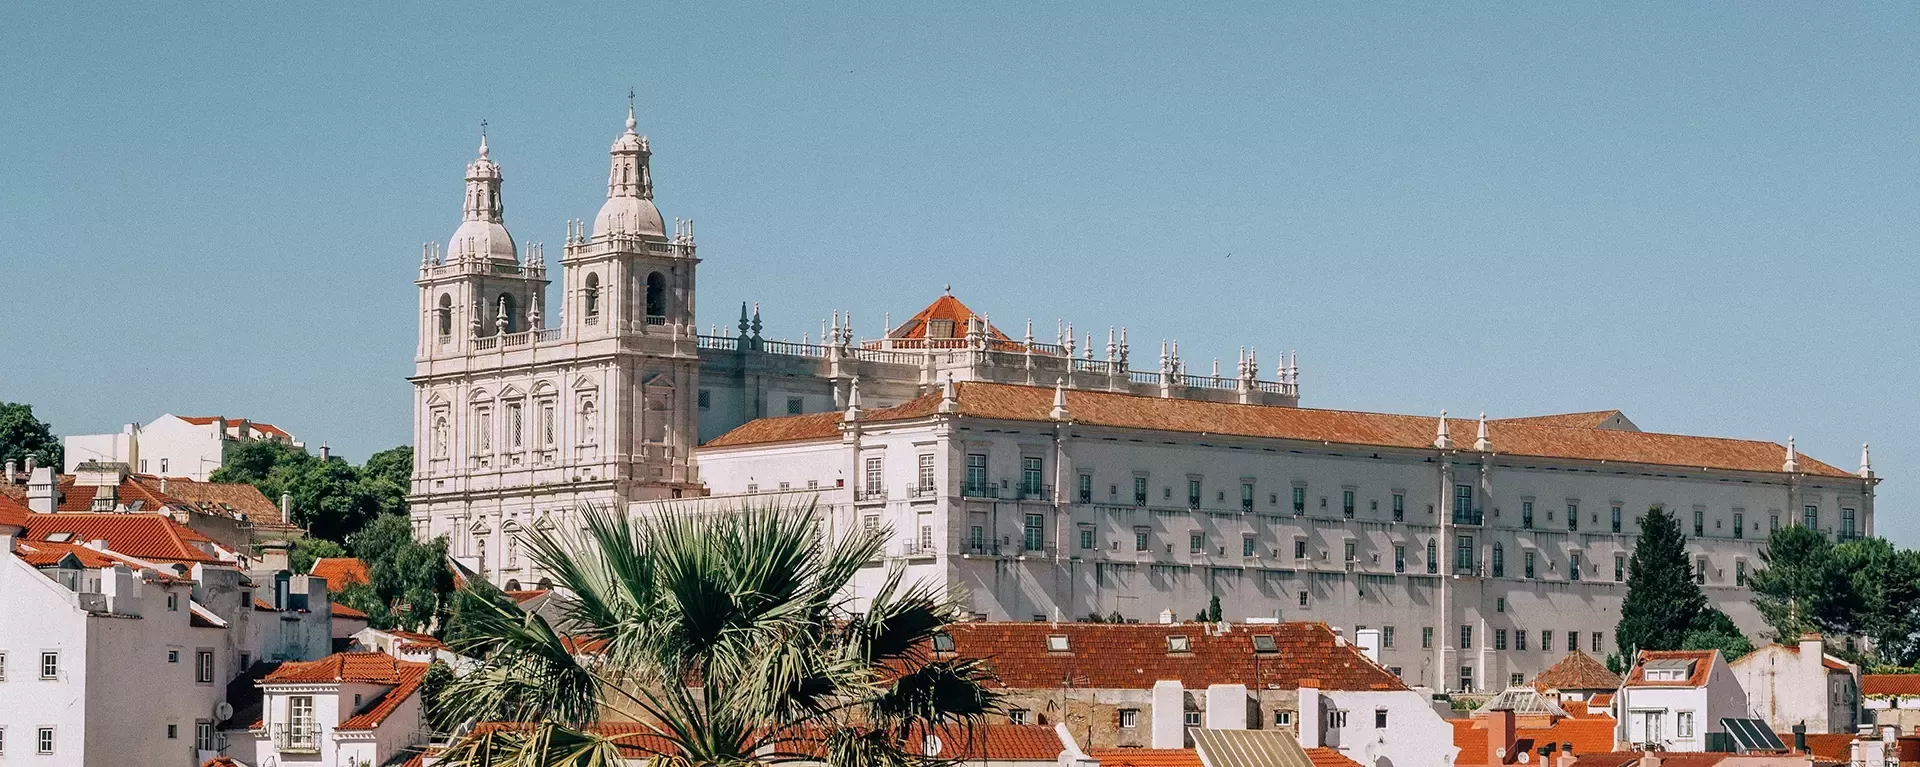 View of grand building in sunny Lisbon, Portugal